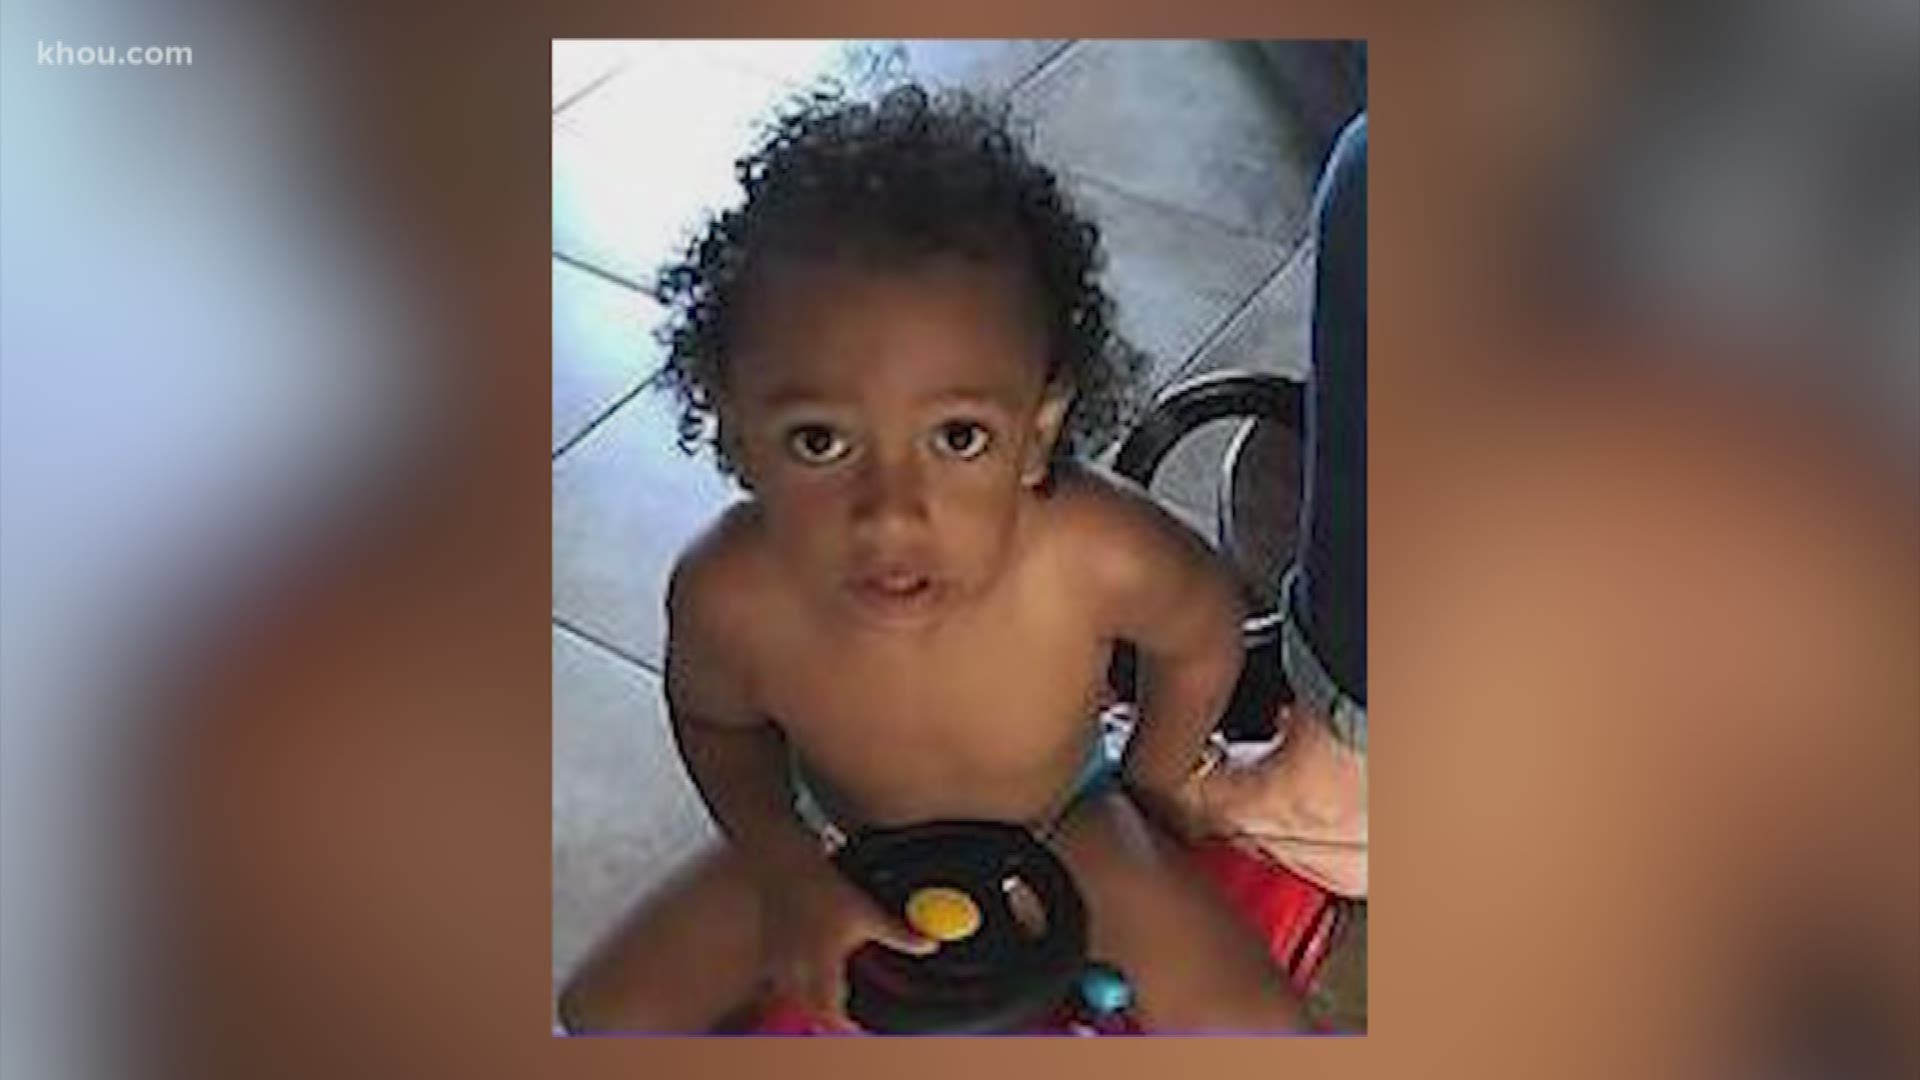 League City Police say a missing 2 year old is in grave danger. Police are looking for Malakhi Bankhead and his parents, Katherine Ulrich, 21, and Cody Bankhead, 24.